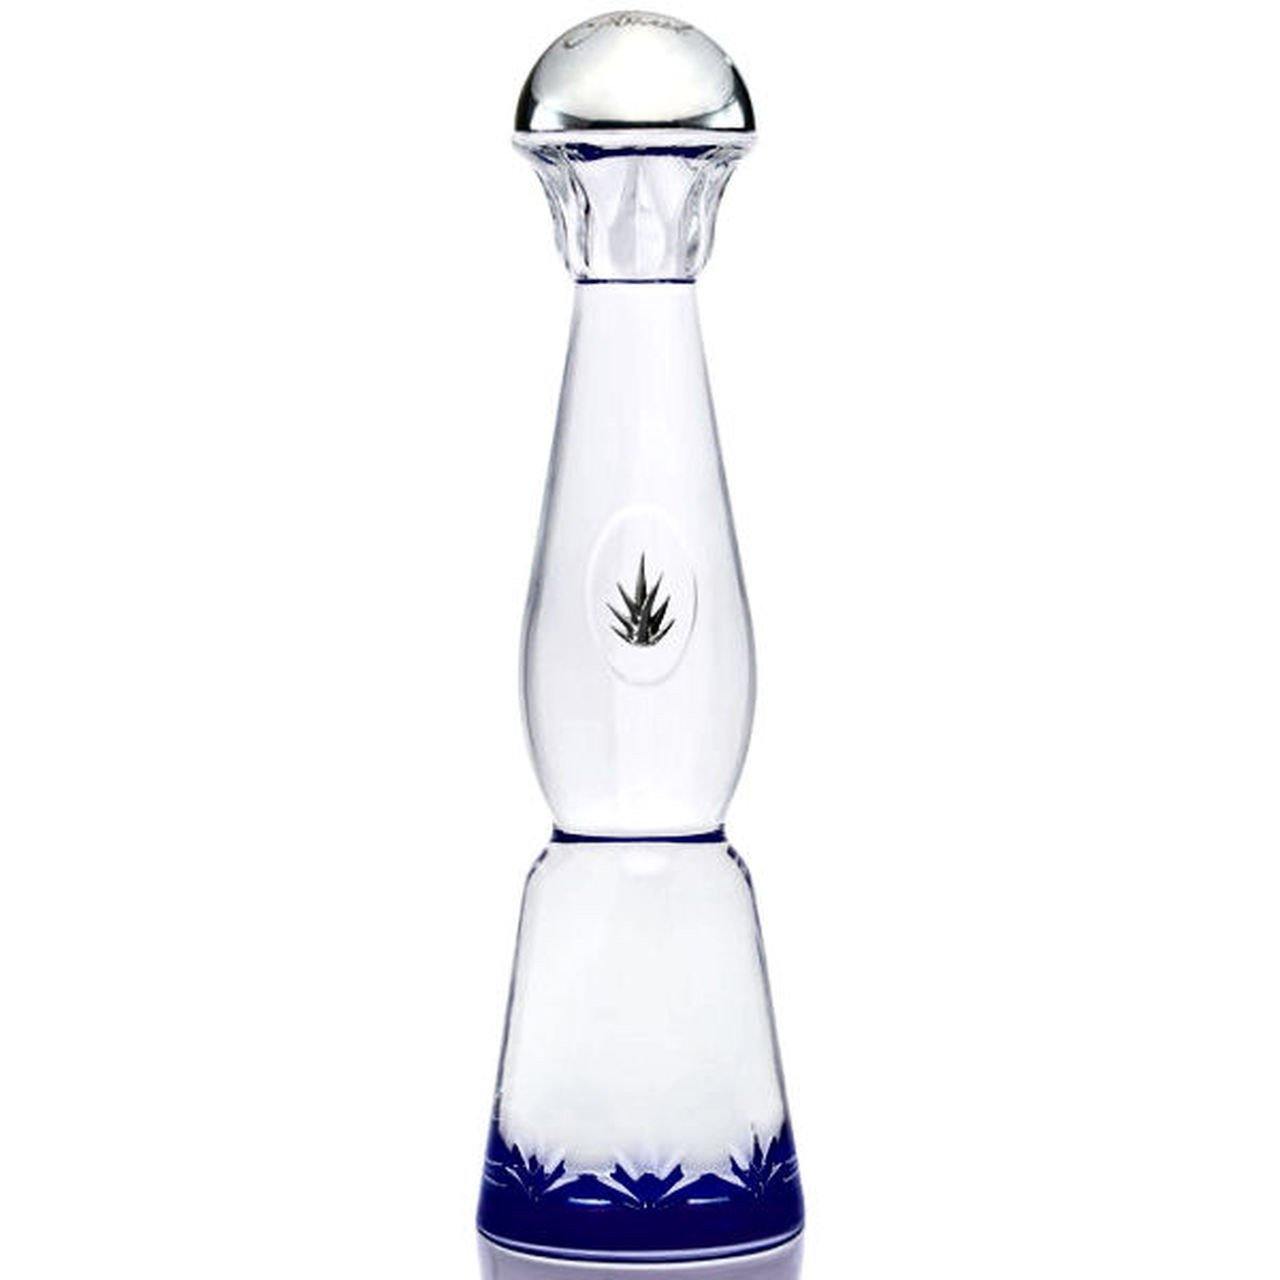 Get Clase Azul Plata tequila Online. Checkout reviews and prices only at  Whisky and Whiskey.com